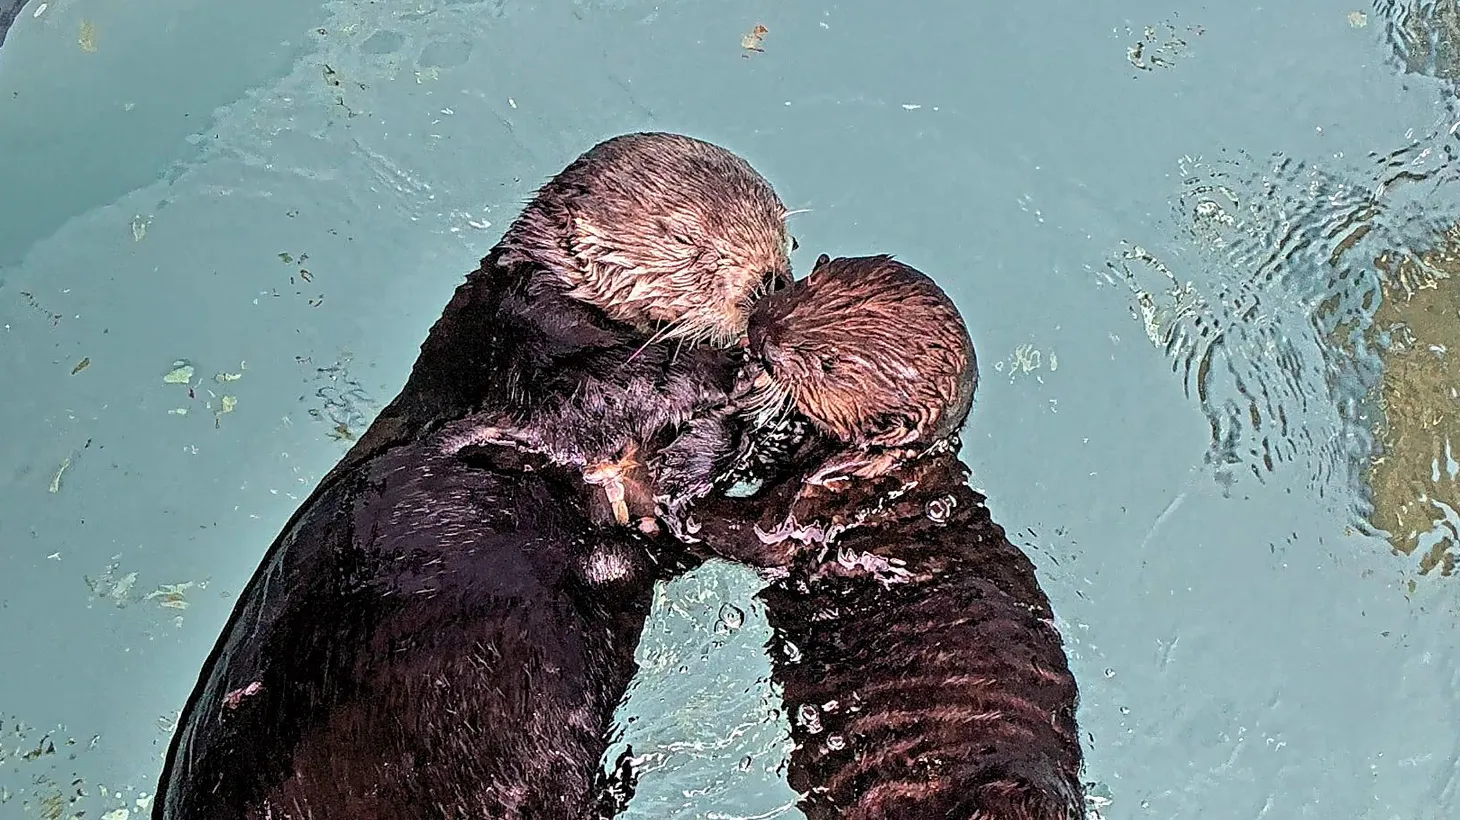 At the Aquarium of the Pacific, surrogate sea otter mom Millie interacts with her first rescued pup who is a candidate for release back into the wild.